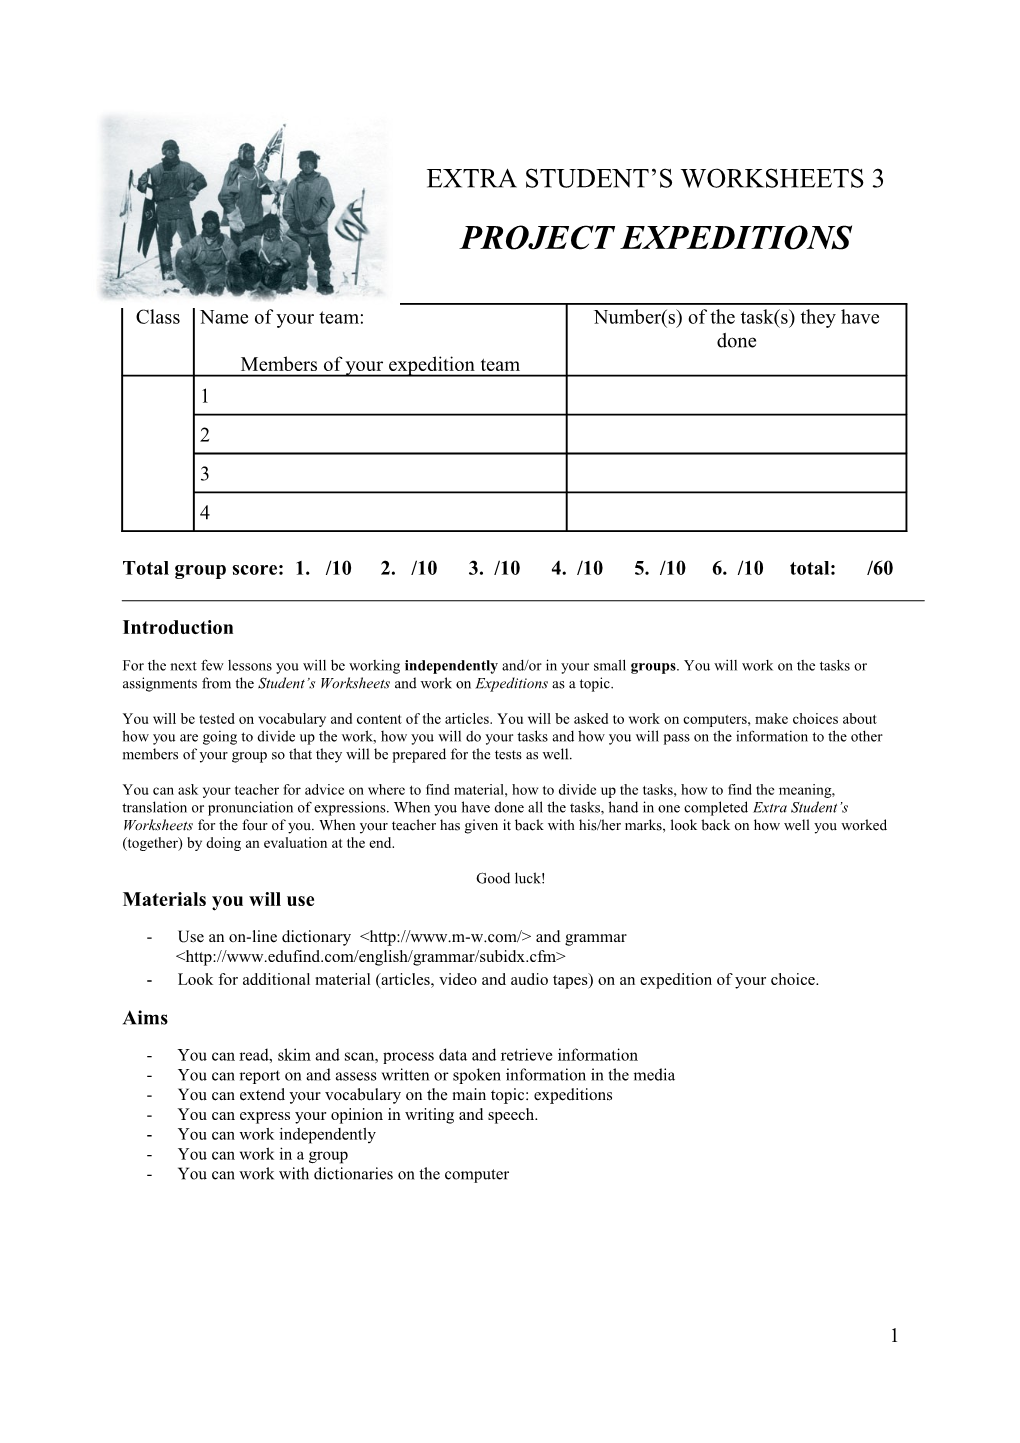 Project Expeditions